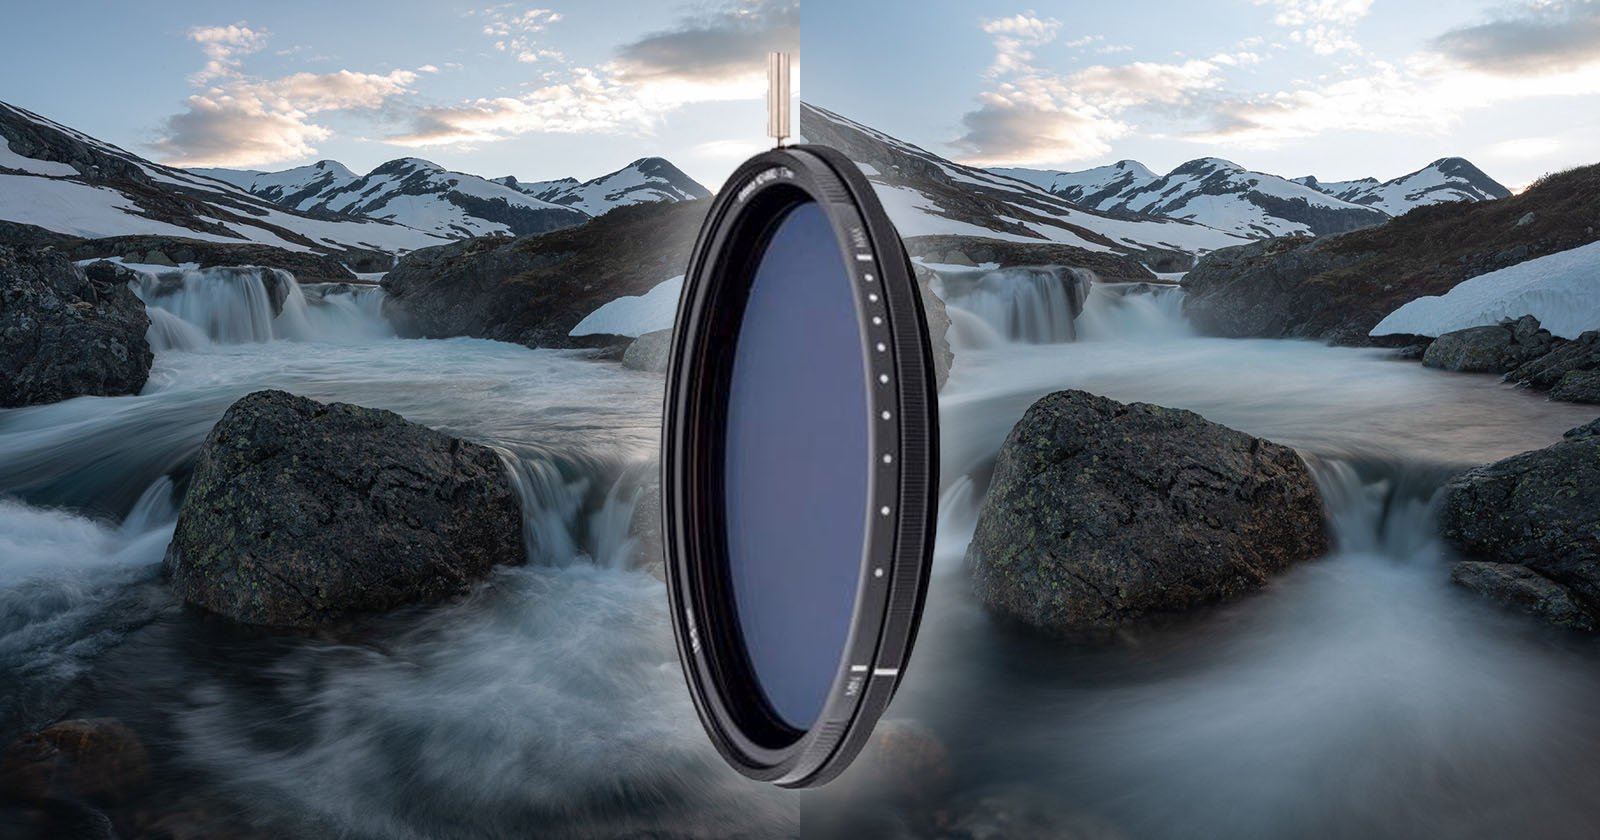 Ideas For Using A Variable Nd Filter To, Landscape Photo Filters